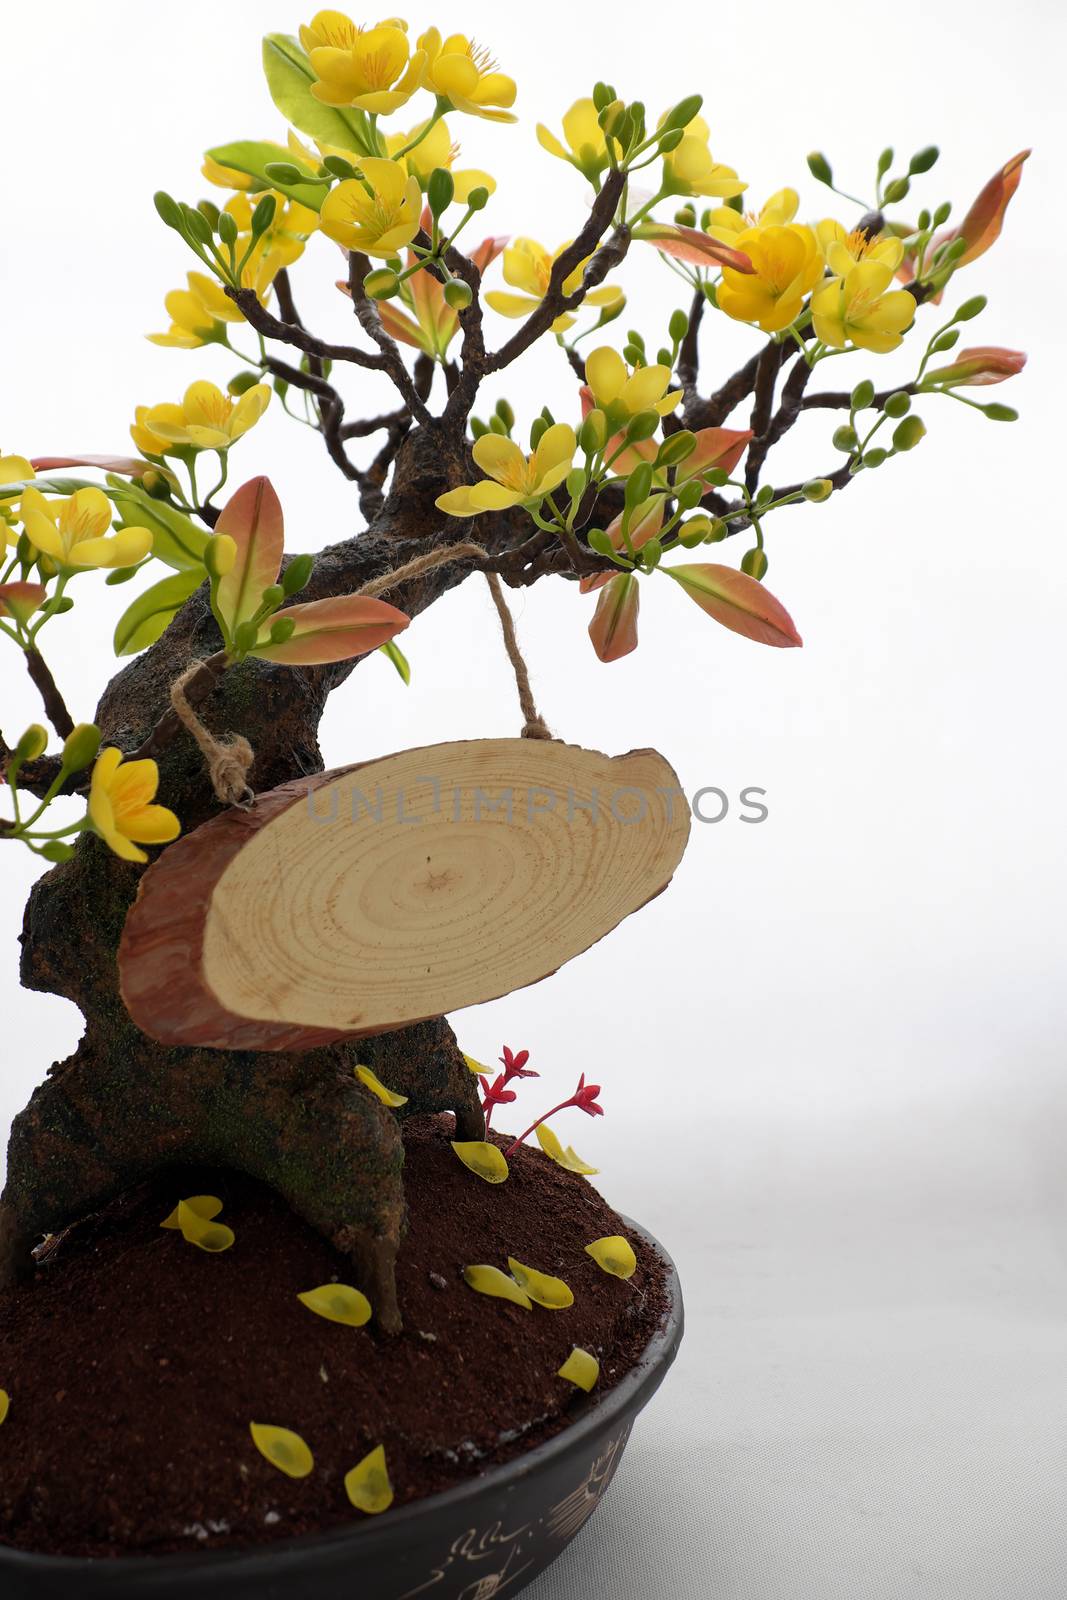 Happy new year with spring flower and wood banner on white background, amazing yellow apricot blossom make from clay, beauty artwork for home decoration in springtime